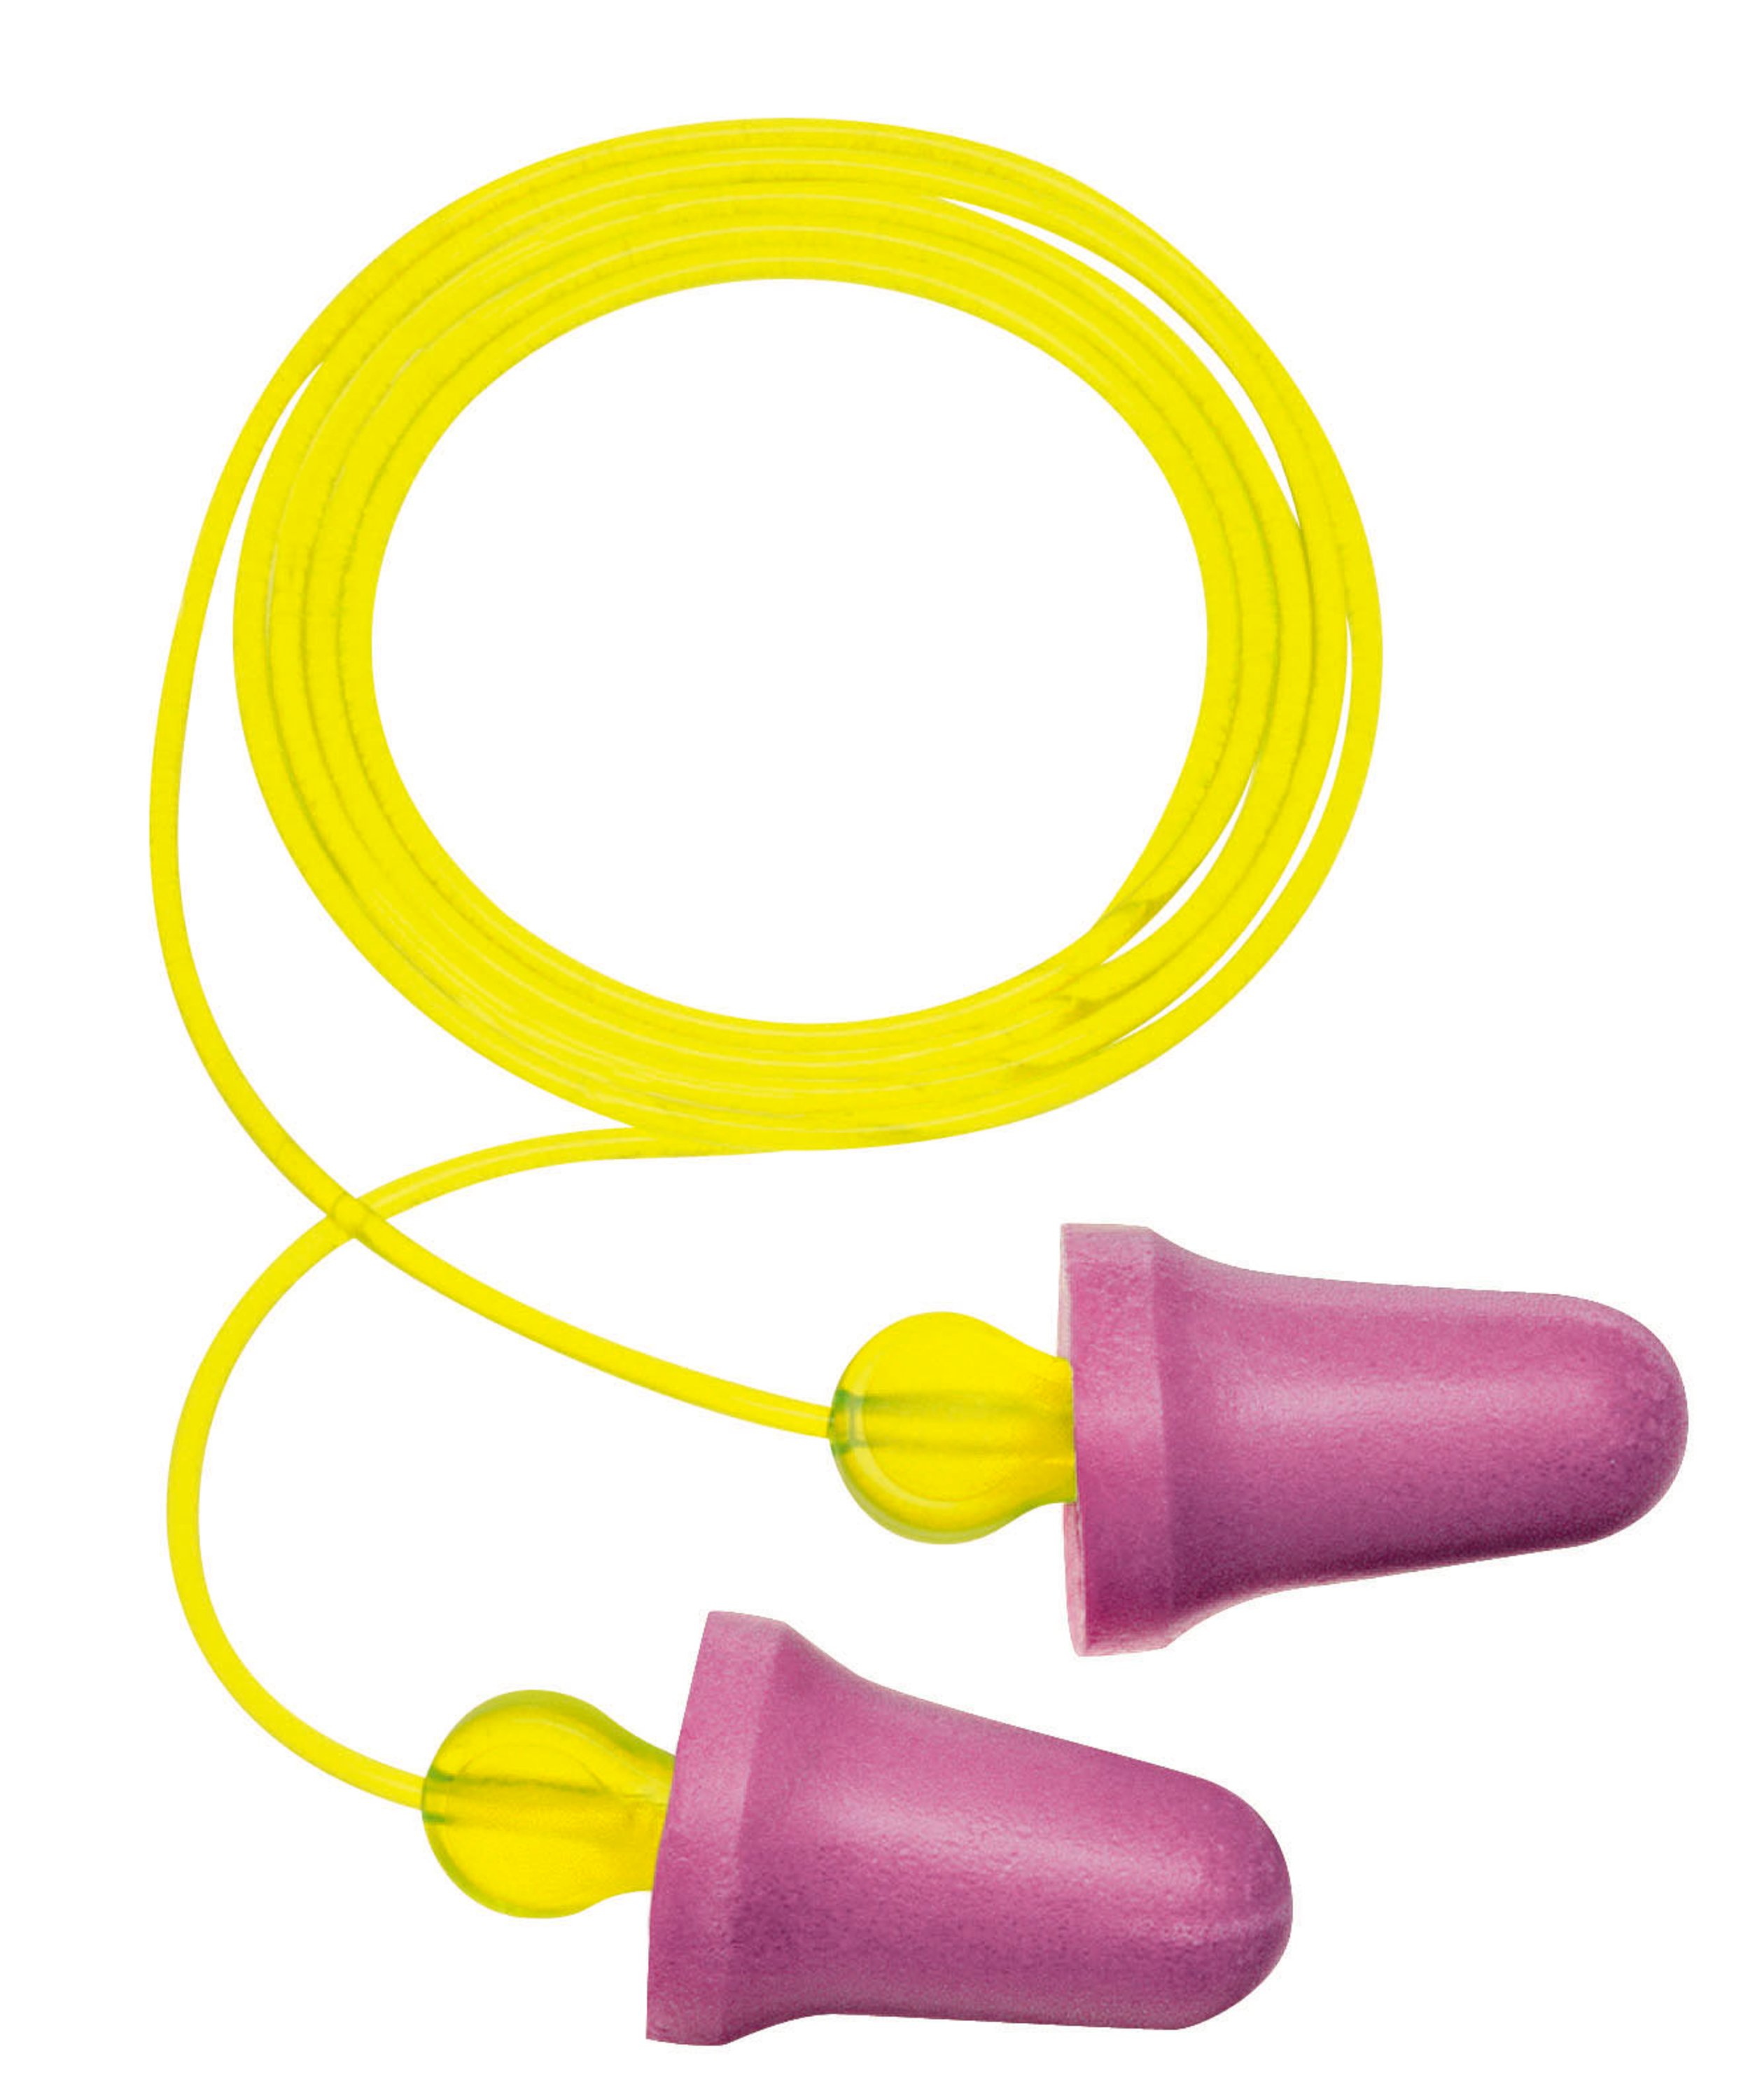 3M™ No-Touch™ P2001 Earplugs, 29 dB Noise Reduction, Tapered Shape, ANSI S3.19-1974, Disposable, Corded Design